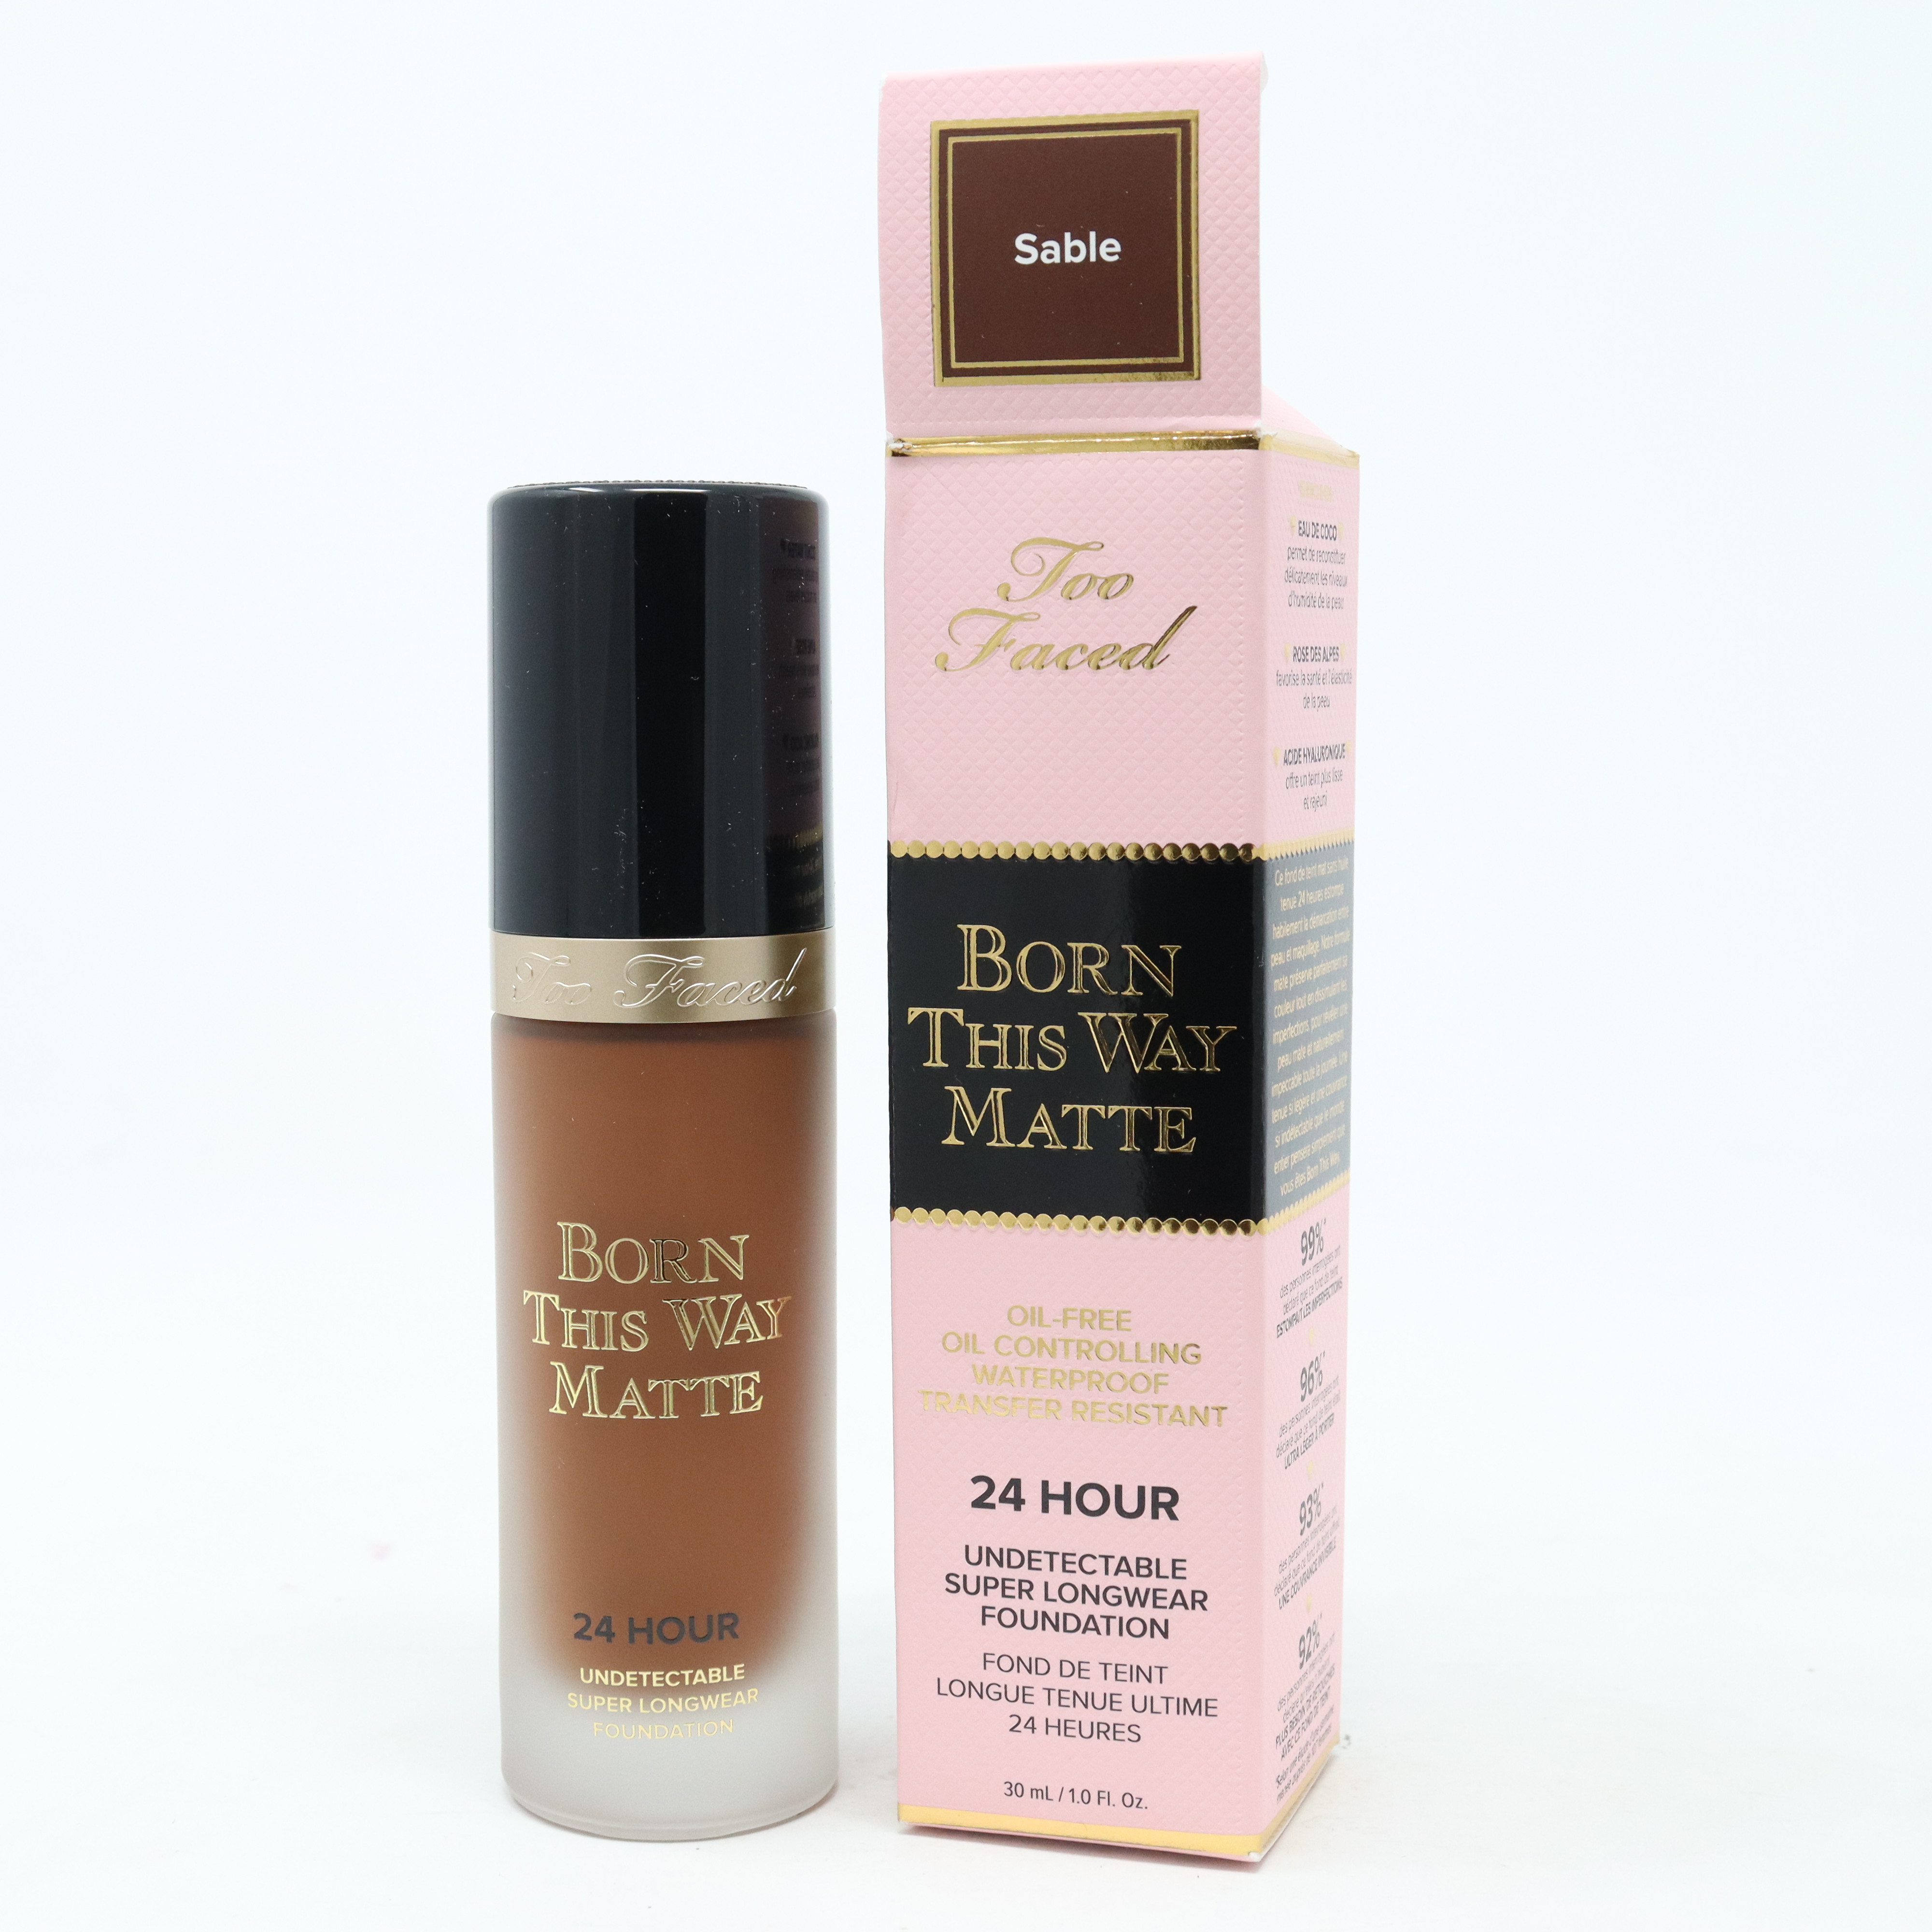 Too Faced Born This Way Matte 24 Hour Foundation 1.0oz/30ml New With Box |  eBay | Foundation